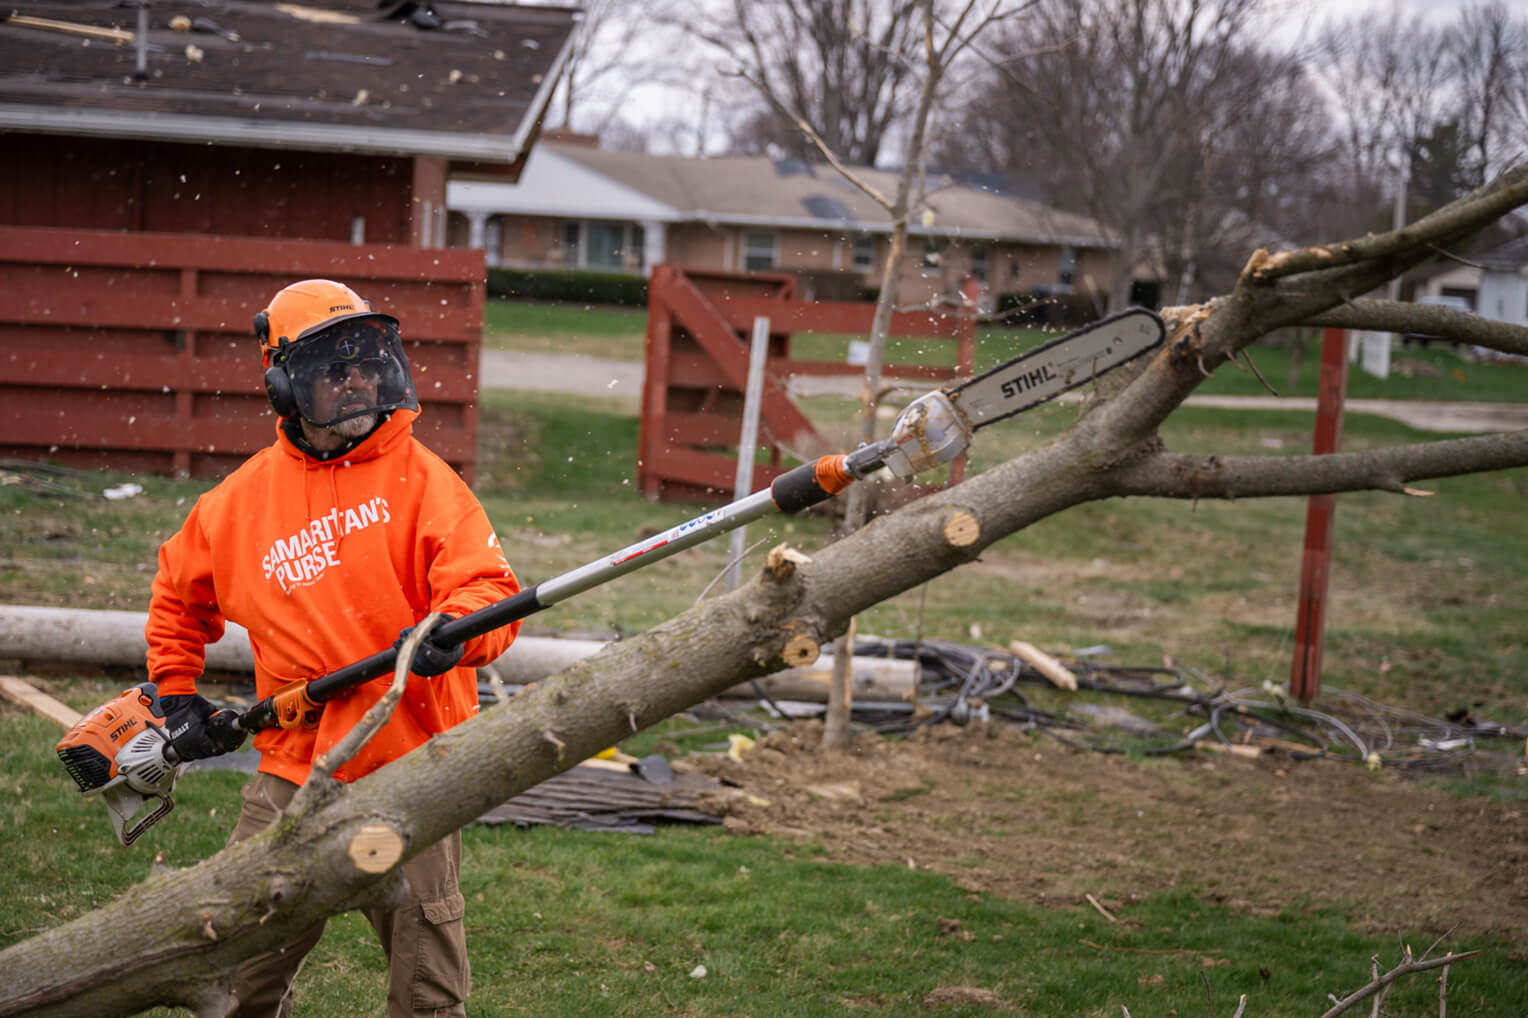 Most recently, volunteers have been hard at work in Indiana and Ohio after storms battered the region.